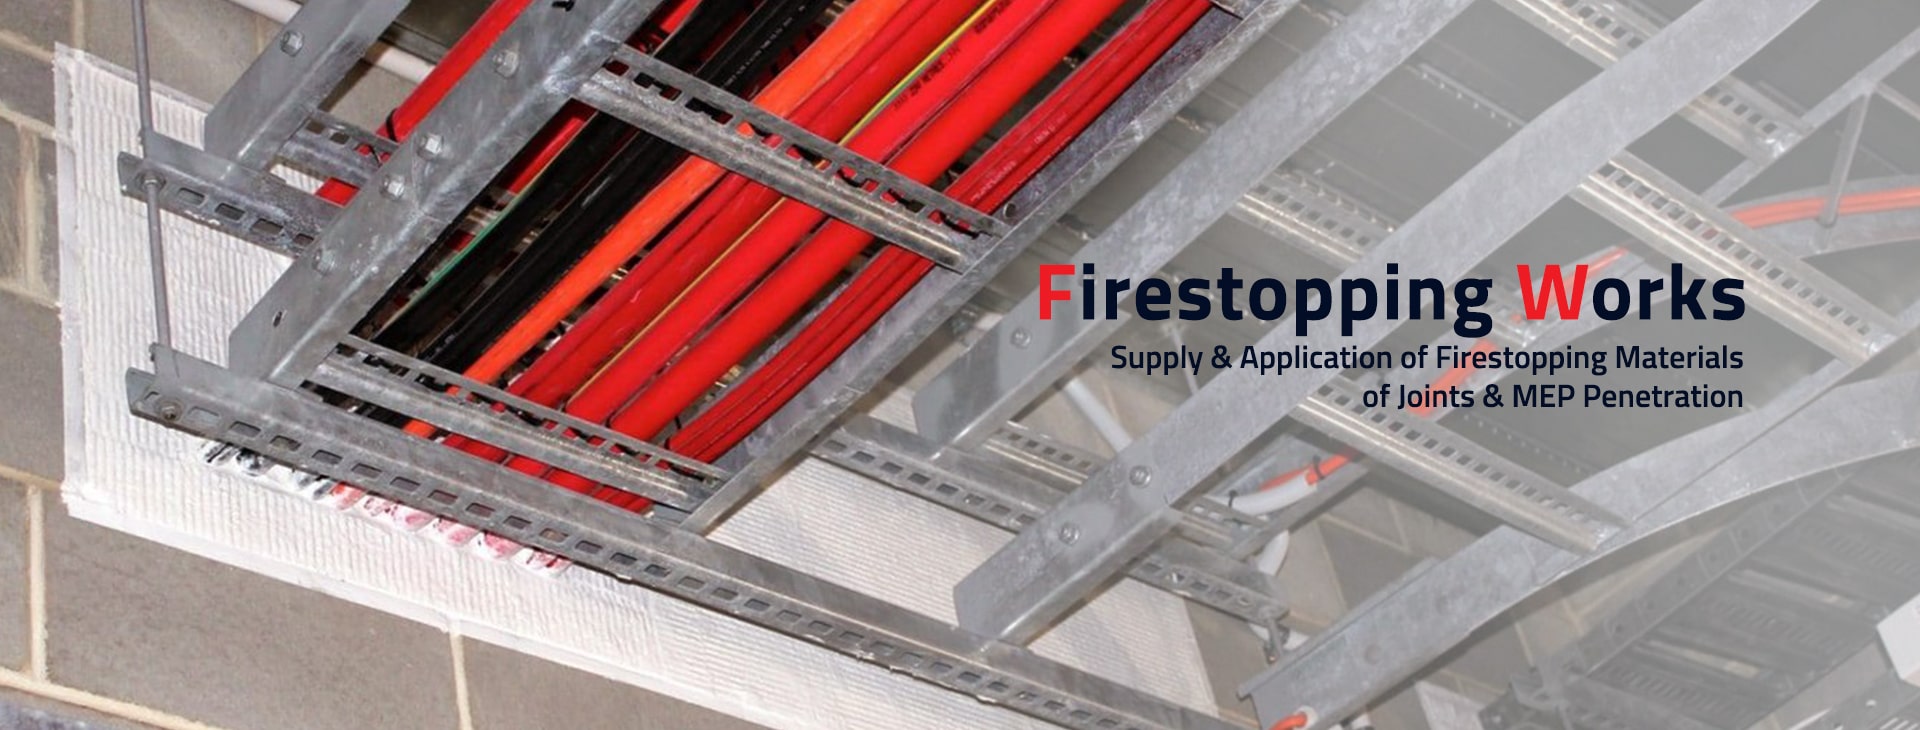 Fire Stopping Works